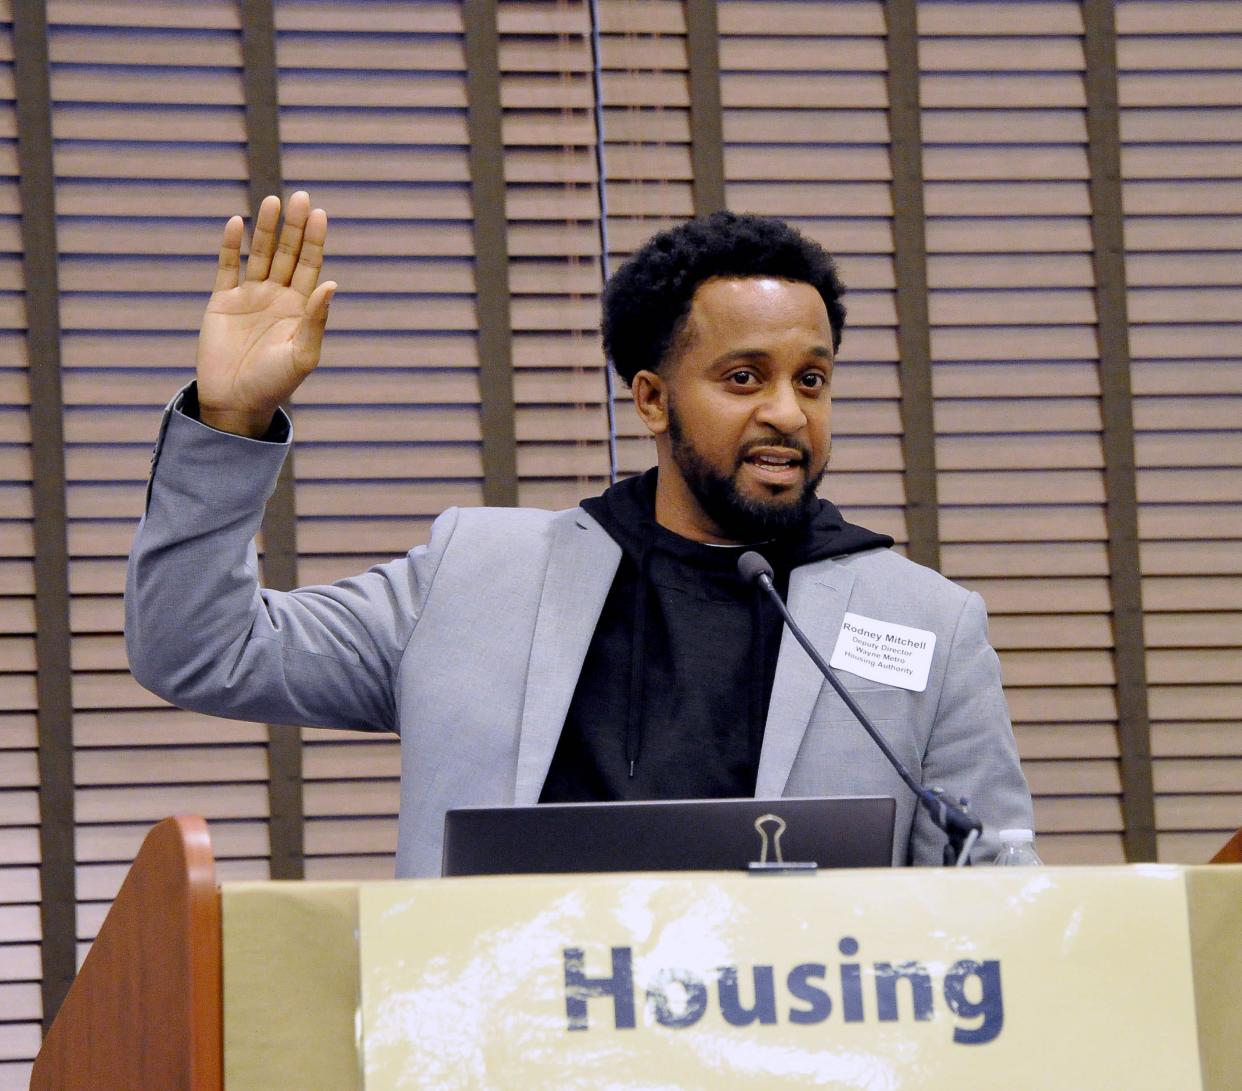 Rodney Mitchell, deputy director at Wayne Metropolitan Housing Authority, said as of March 19 there were 1,205 applicants on the WCMH waiting list for Section 8 housing, and there were 1,291 applicants on the public housing waiting list.